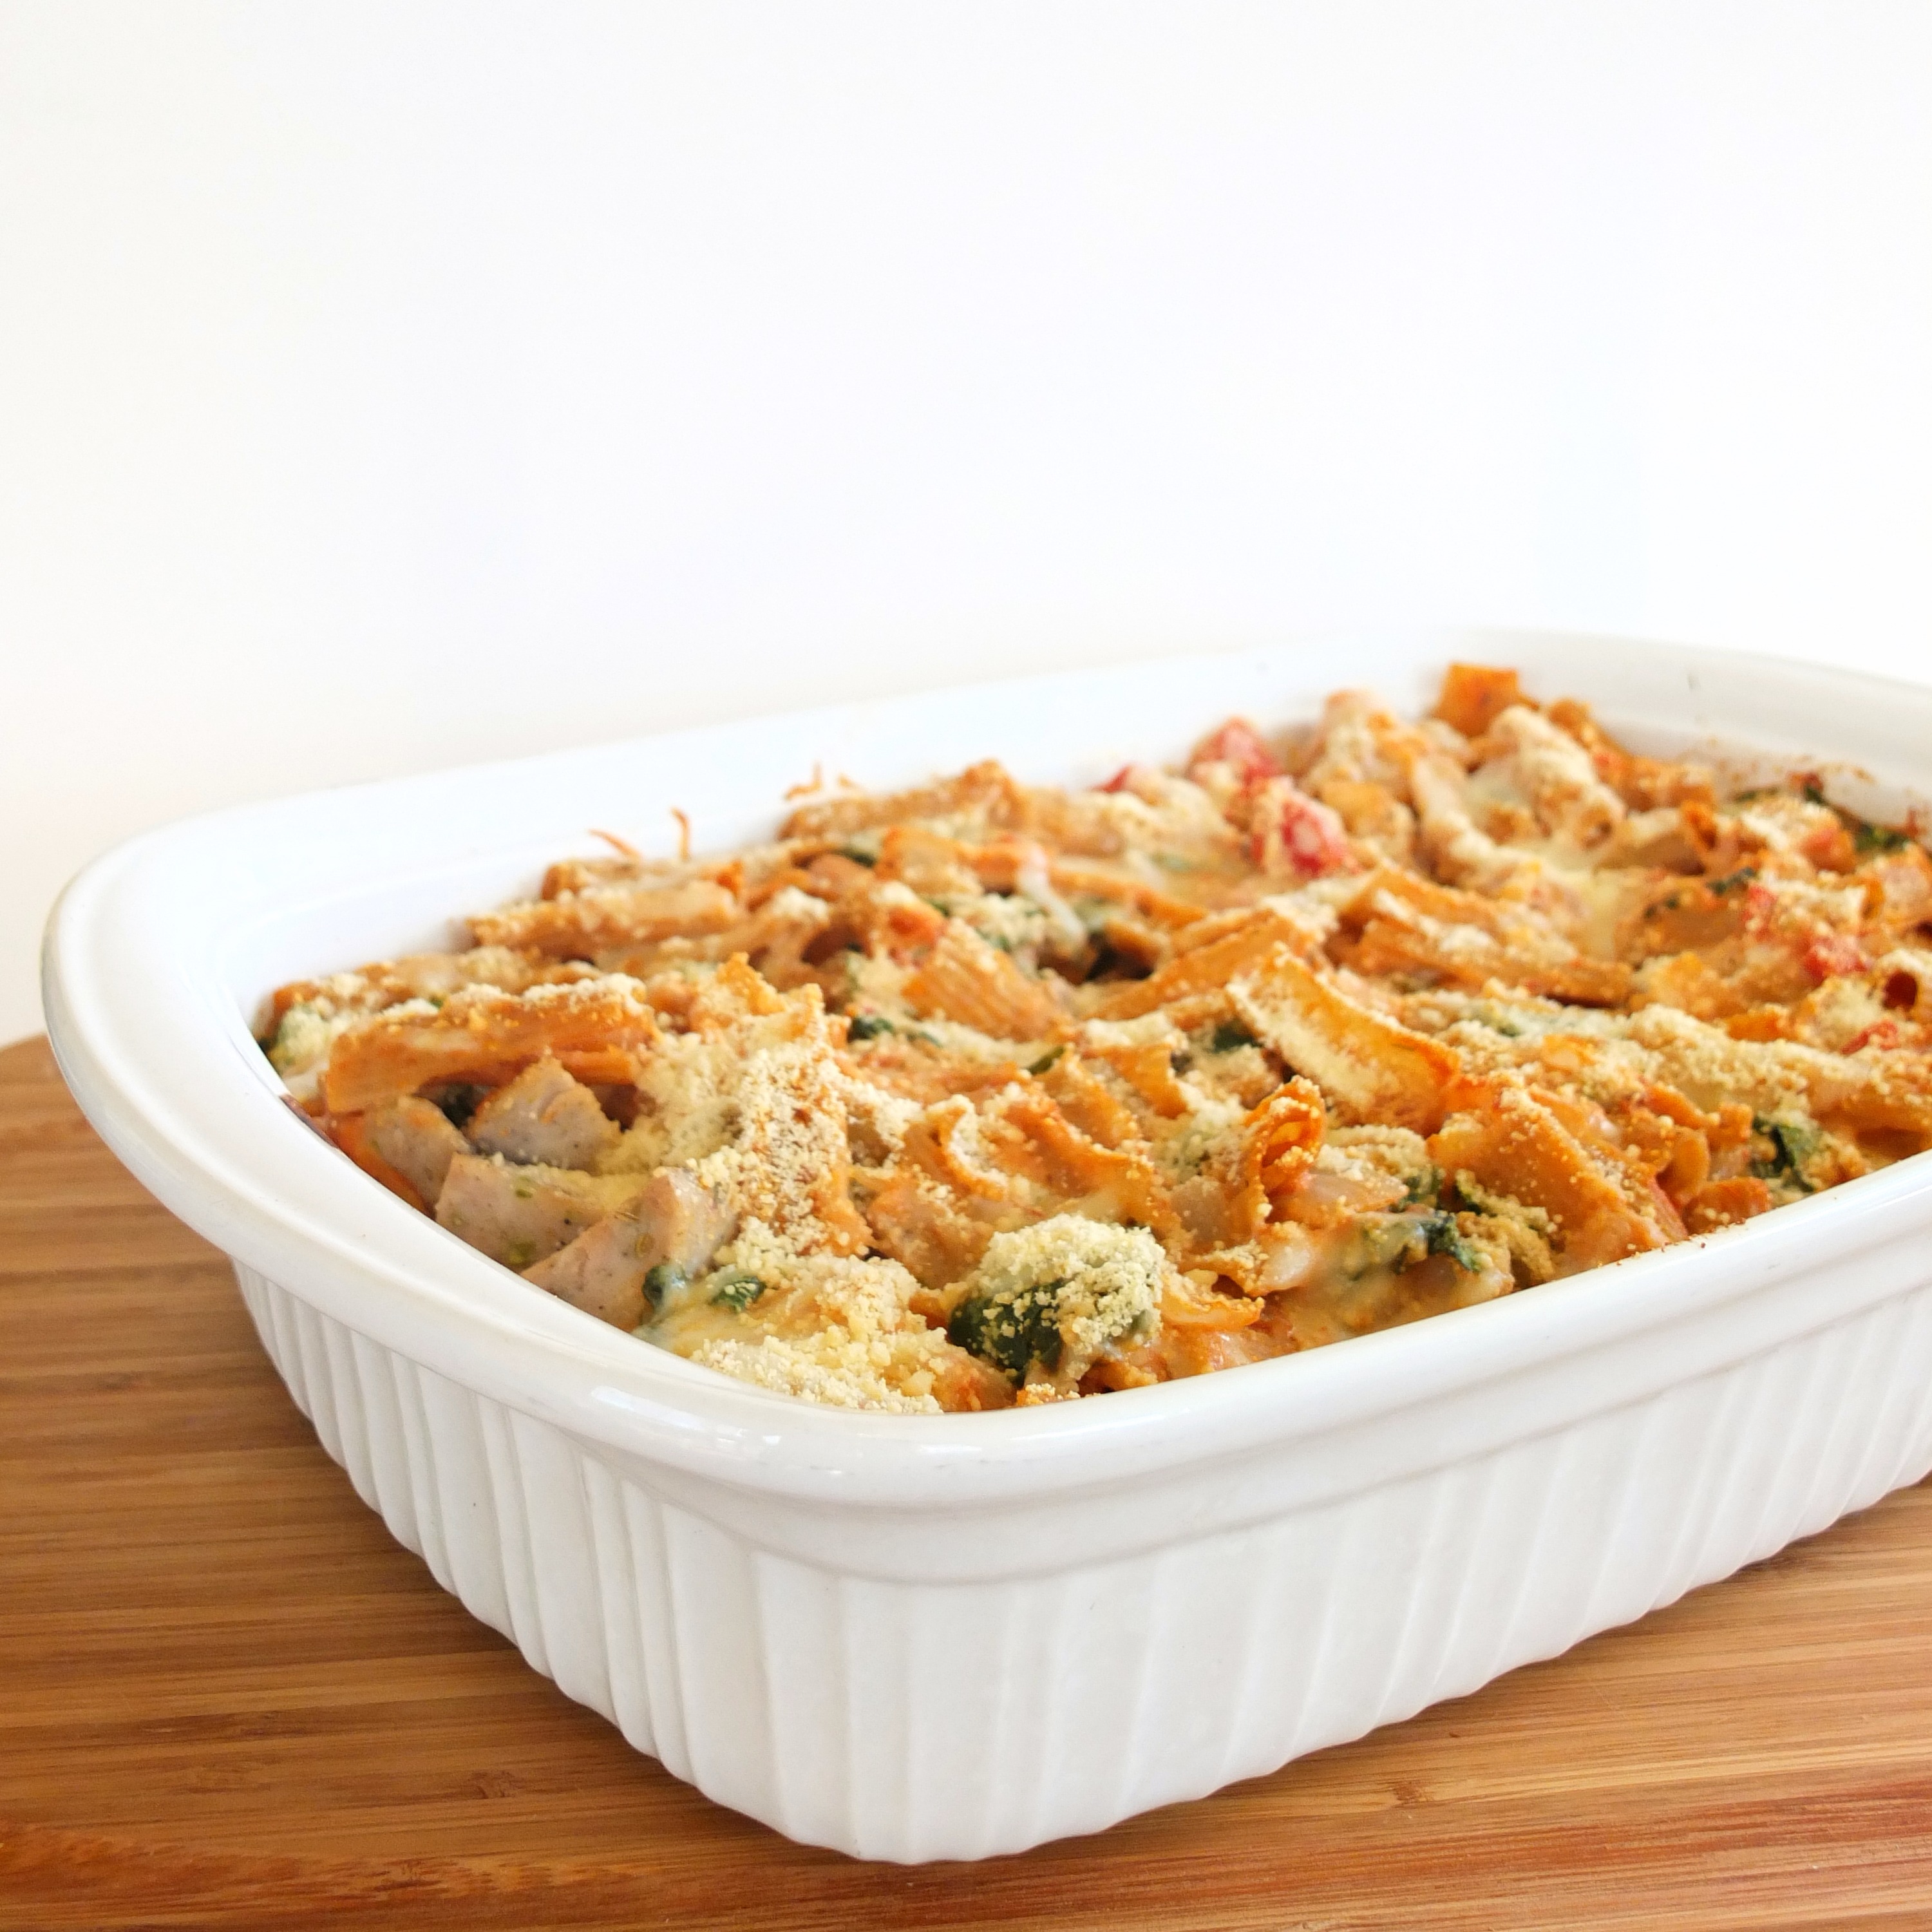 Baked Pasta with Chicken Sausage Recipe